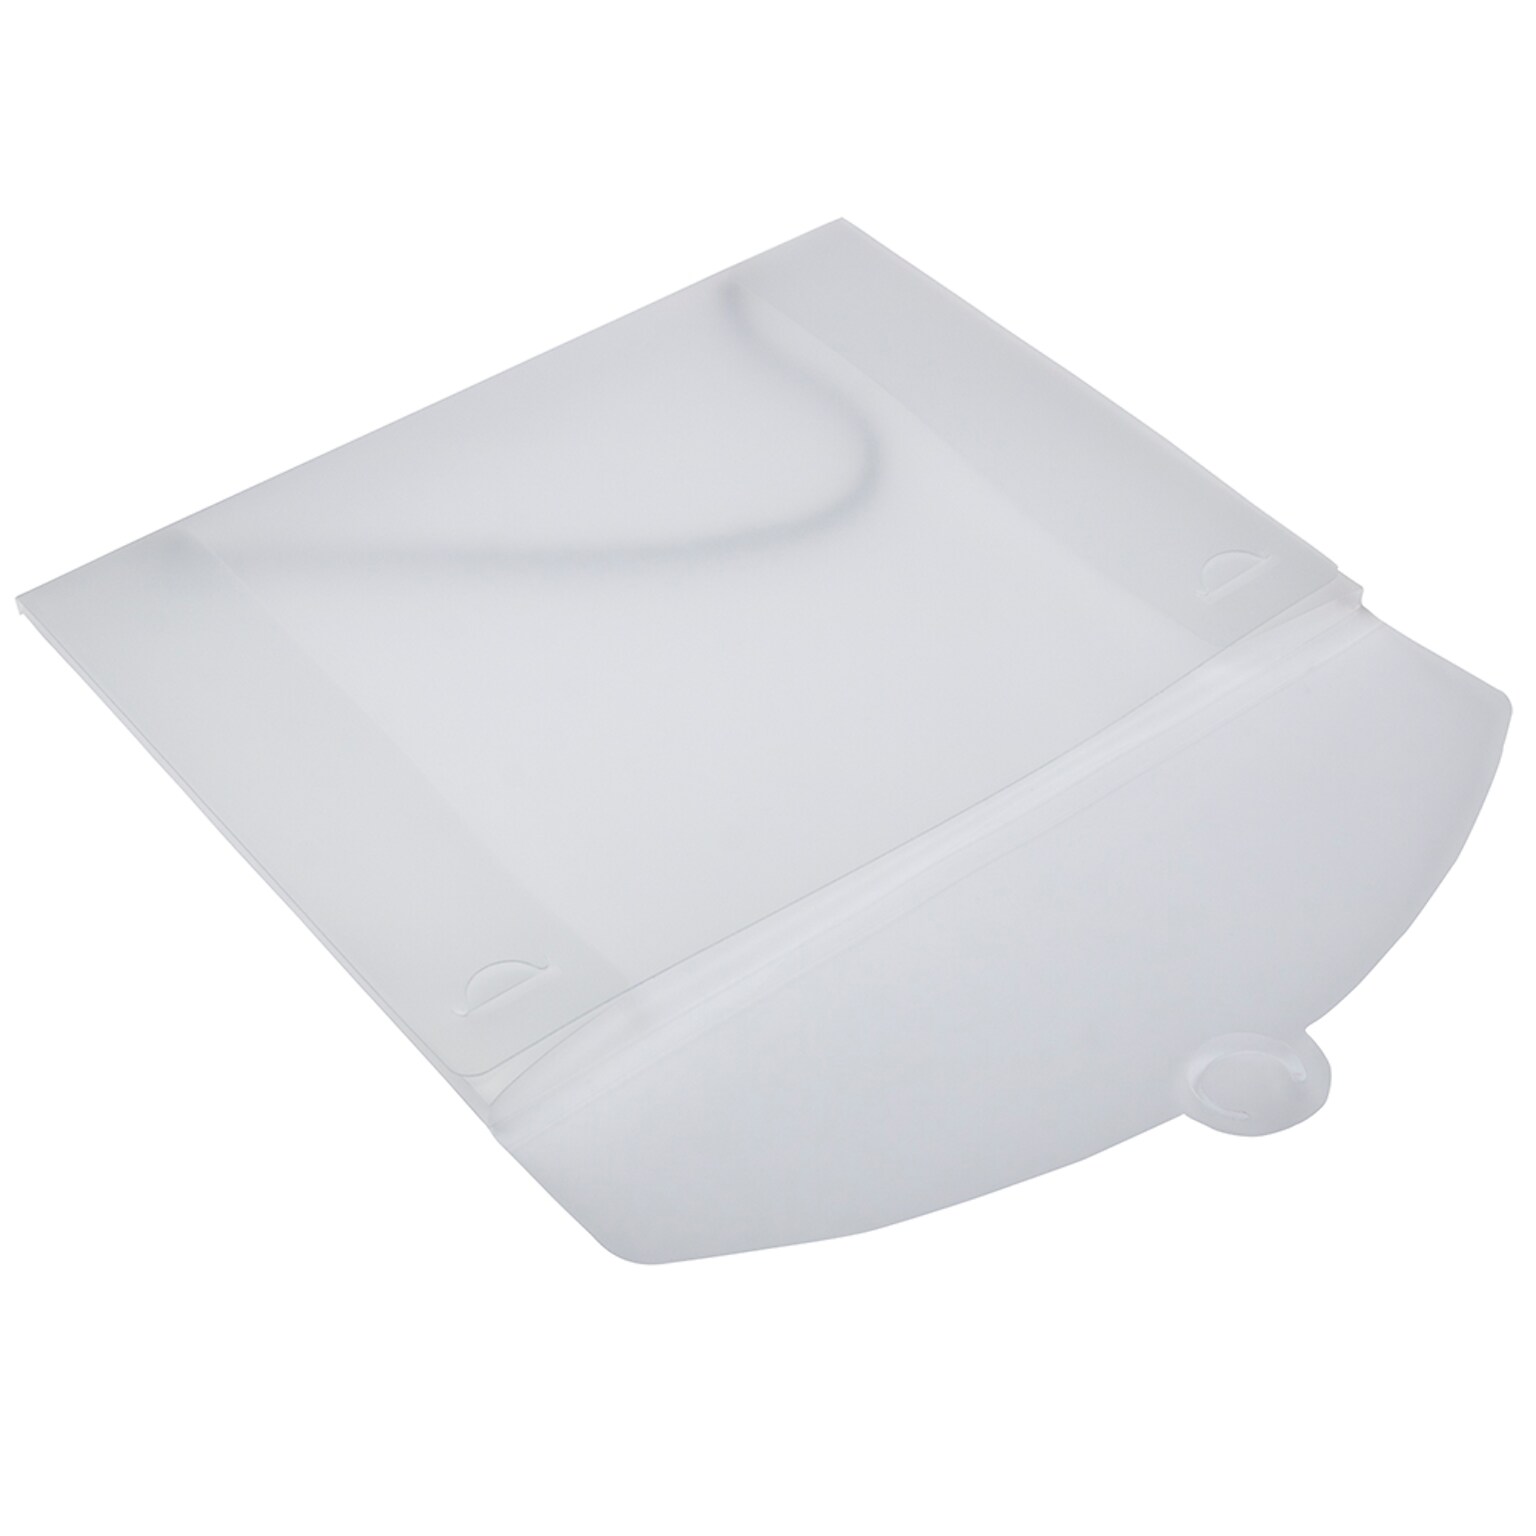 JAM Paper Heavy Duty Plastic Portfolio with Hook Closure, Large, 9 1/2 x 12 x 1/4, Clear Frost, Sold Individually (2025 009)